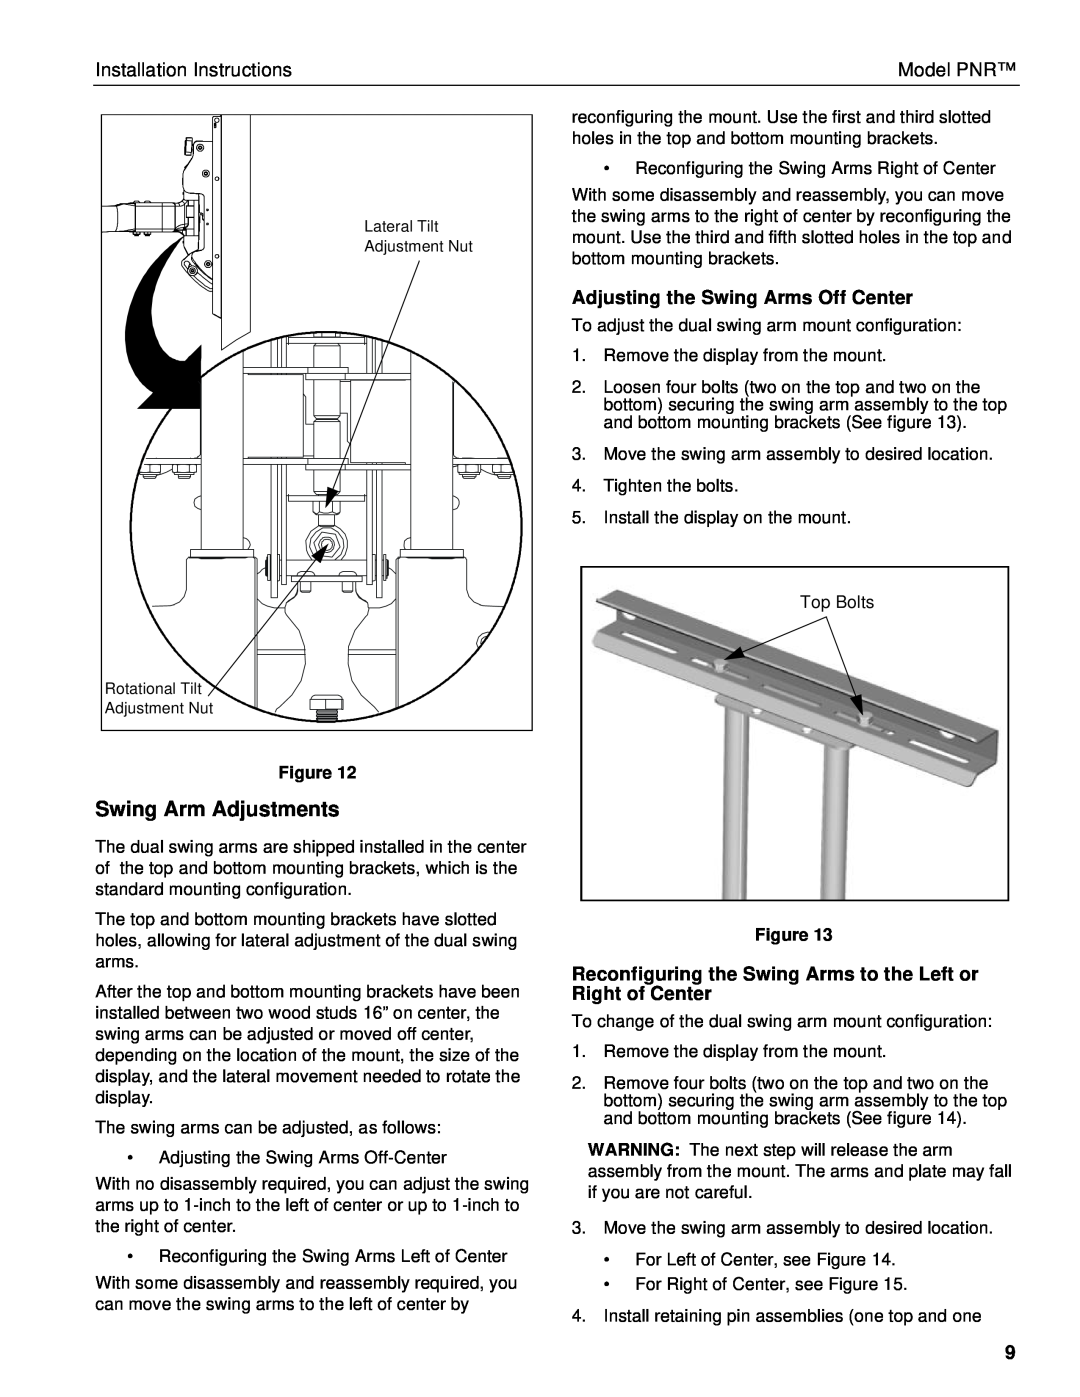 Chief Manufacturing PNR installation instructions Swing Arm Adjustments, Adjusting the Swing Arms Off Center 